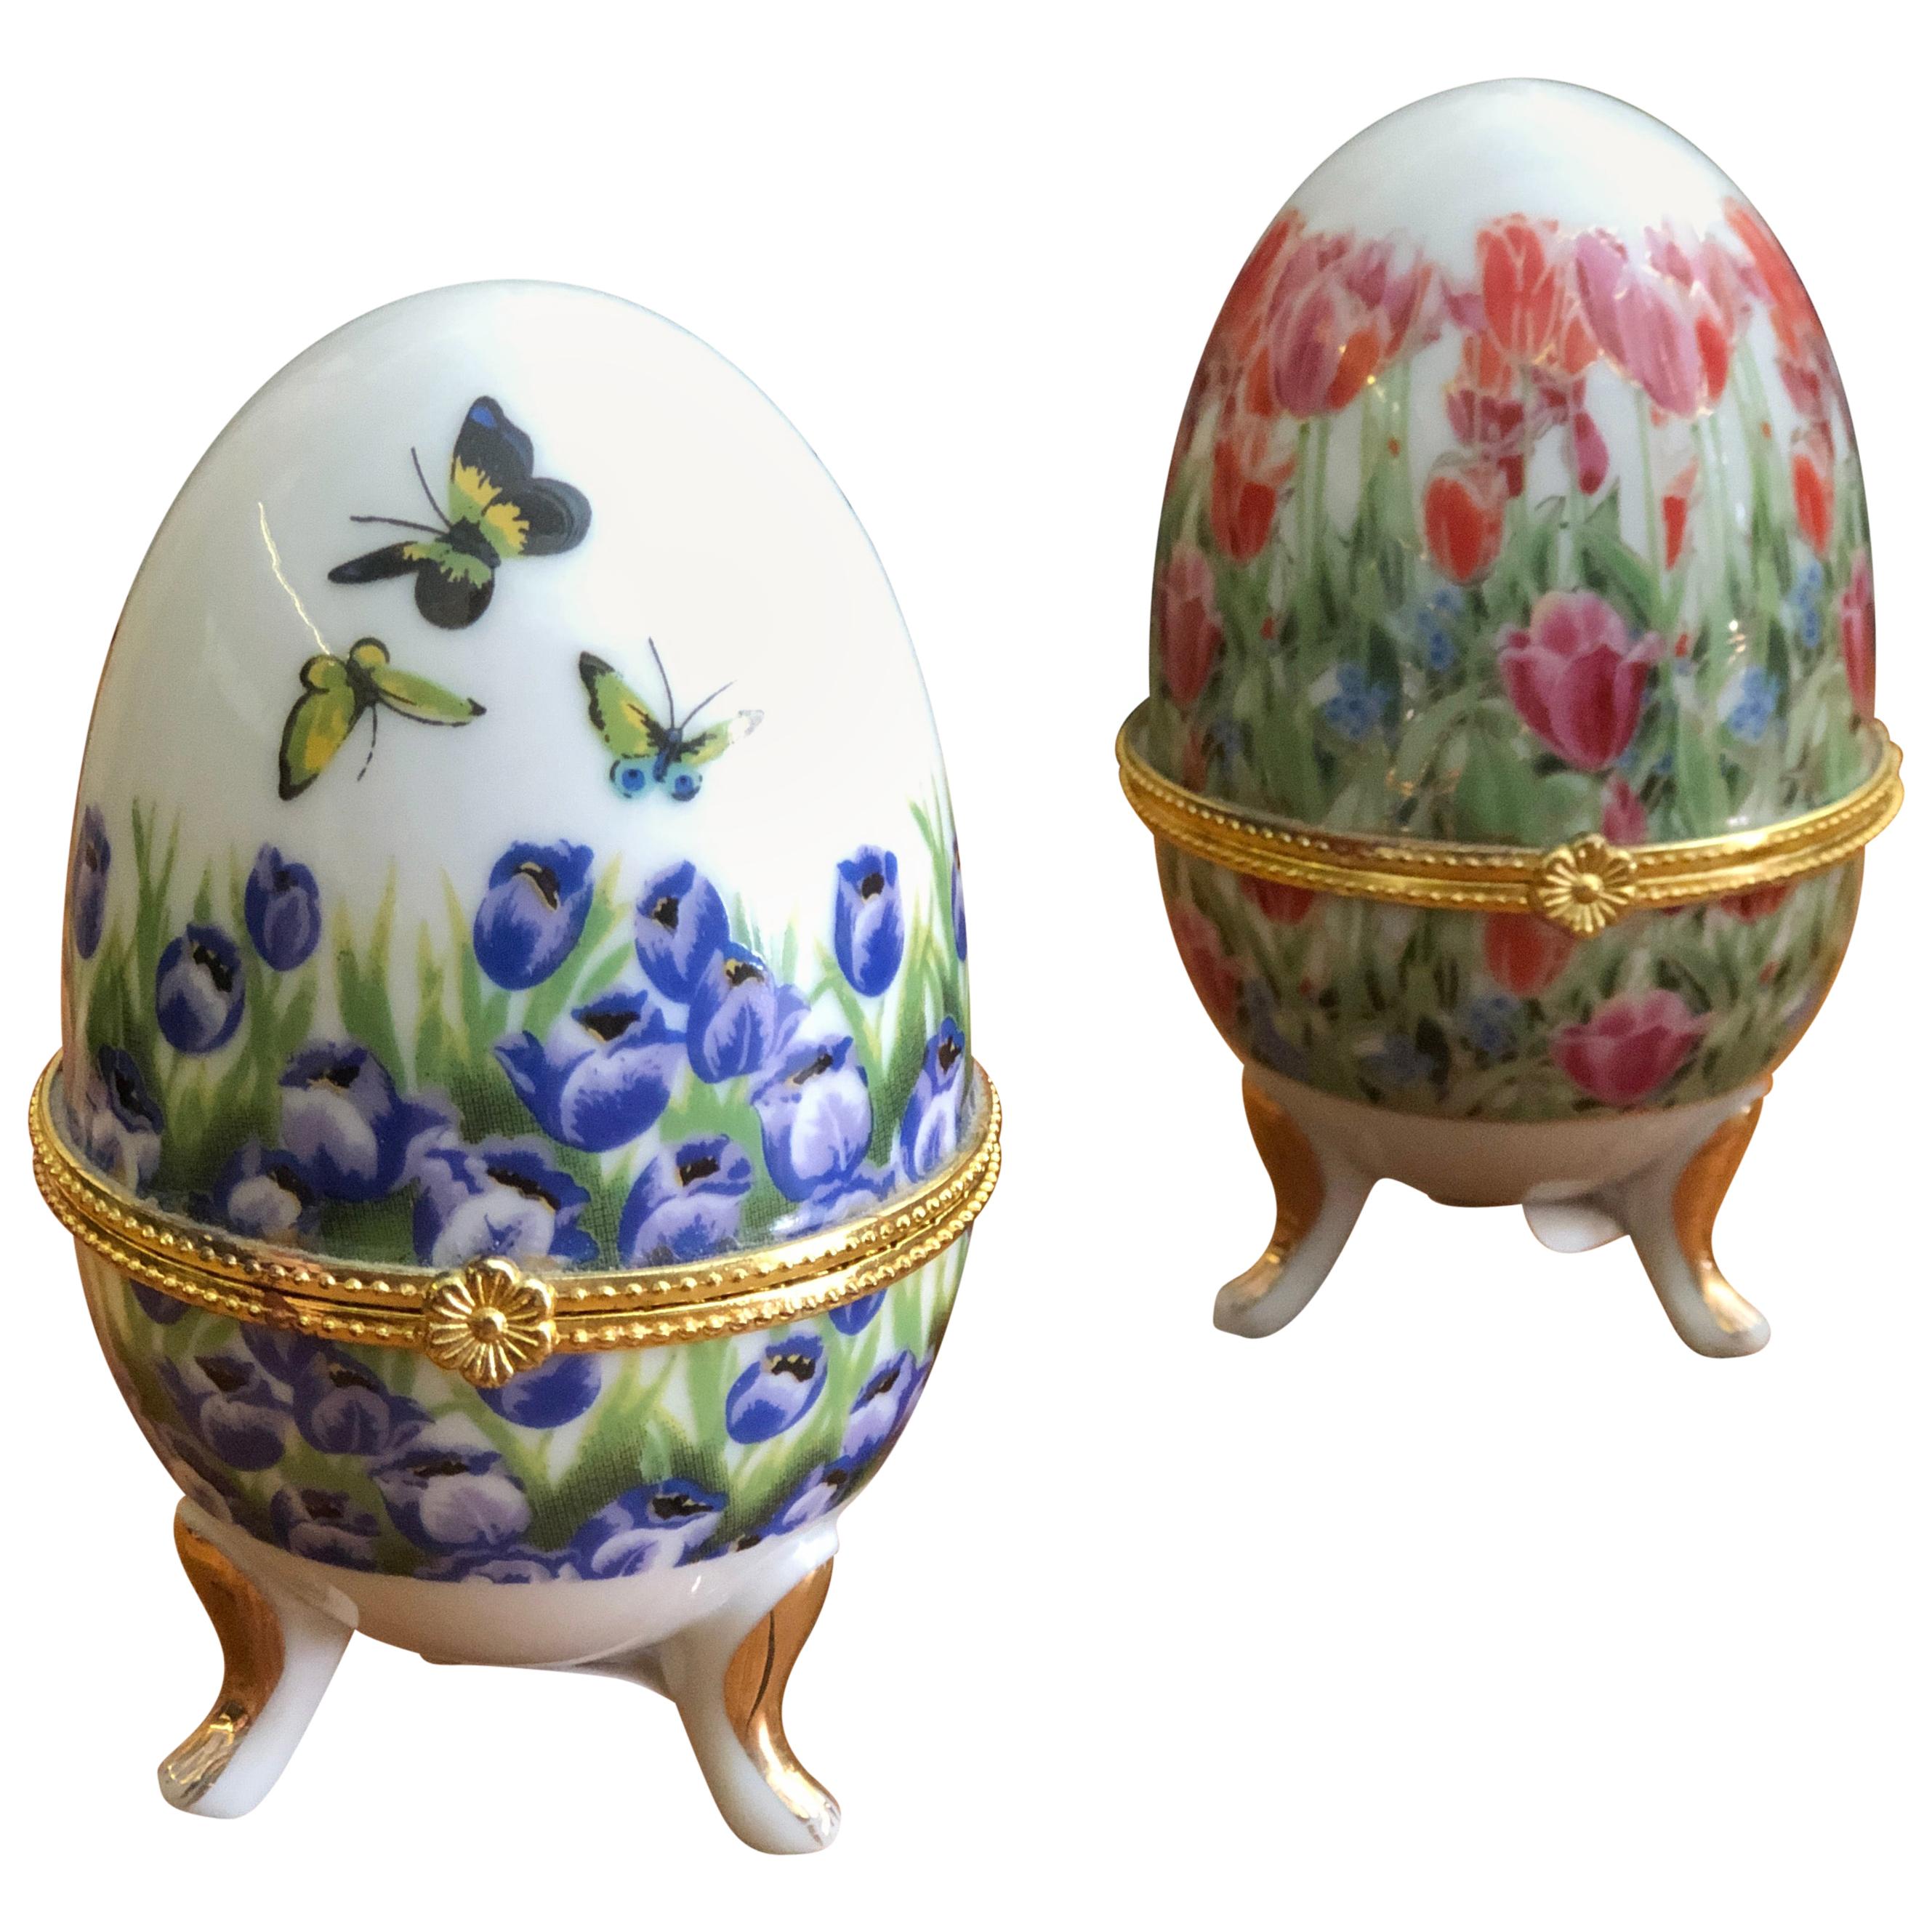 Yangmani Creative Home Ornaments/Exquisite Carving Egg Music Jewelry Box Ornaments Ideas 